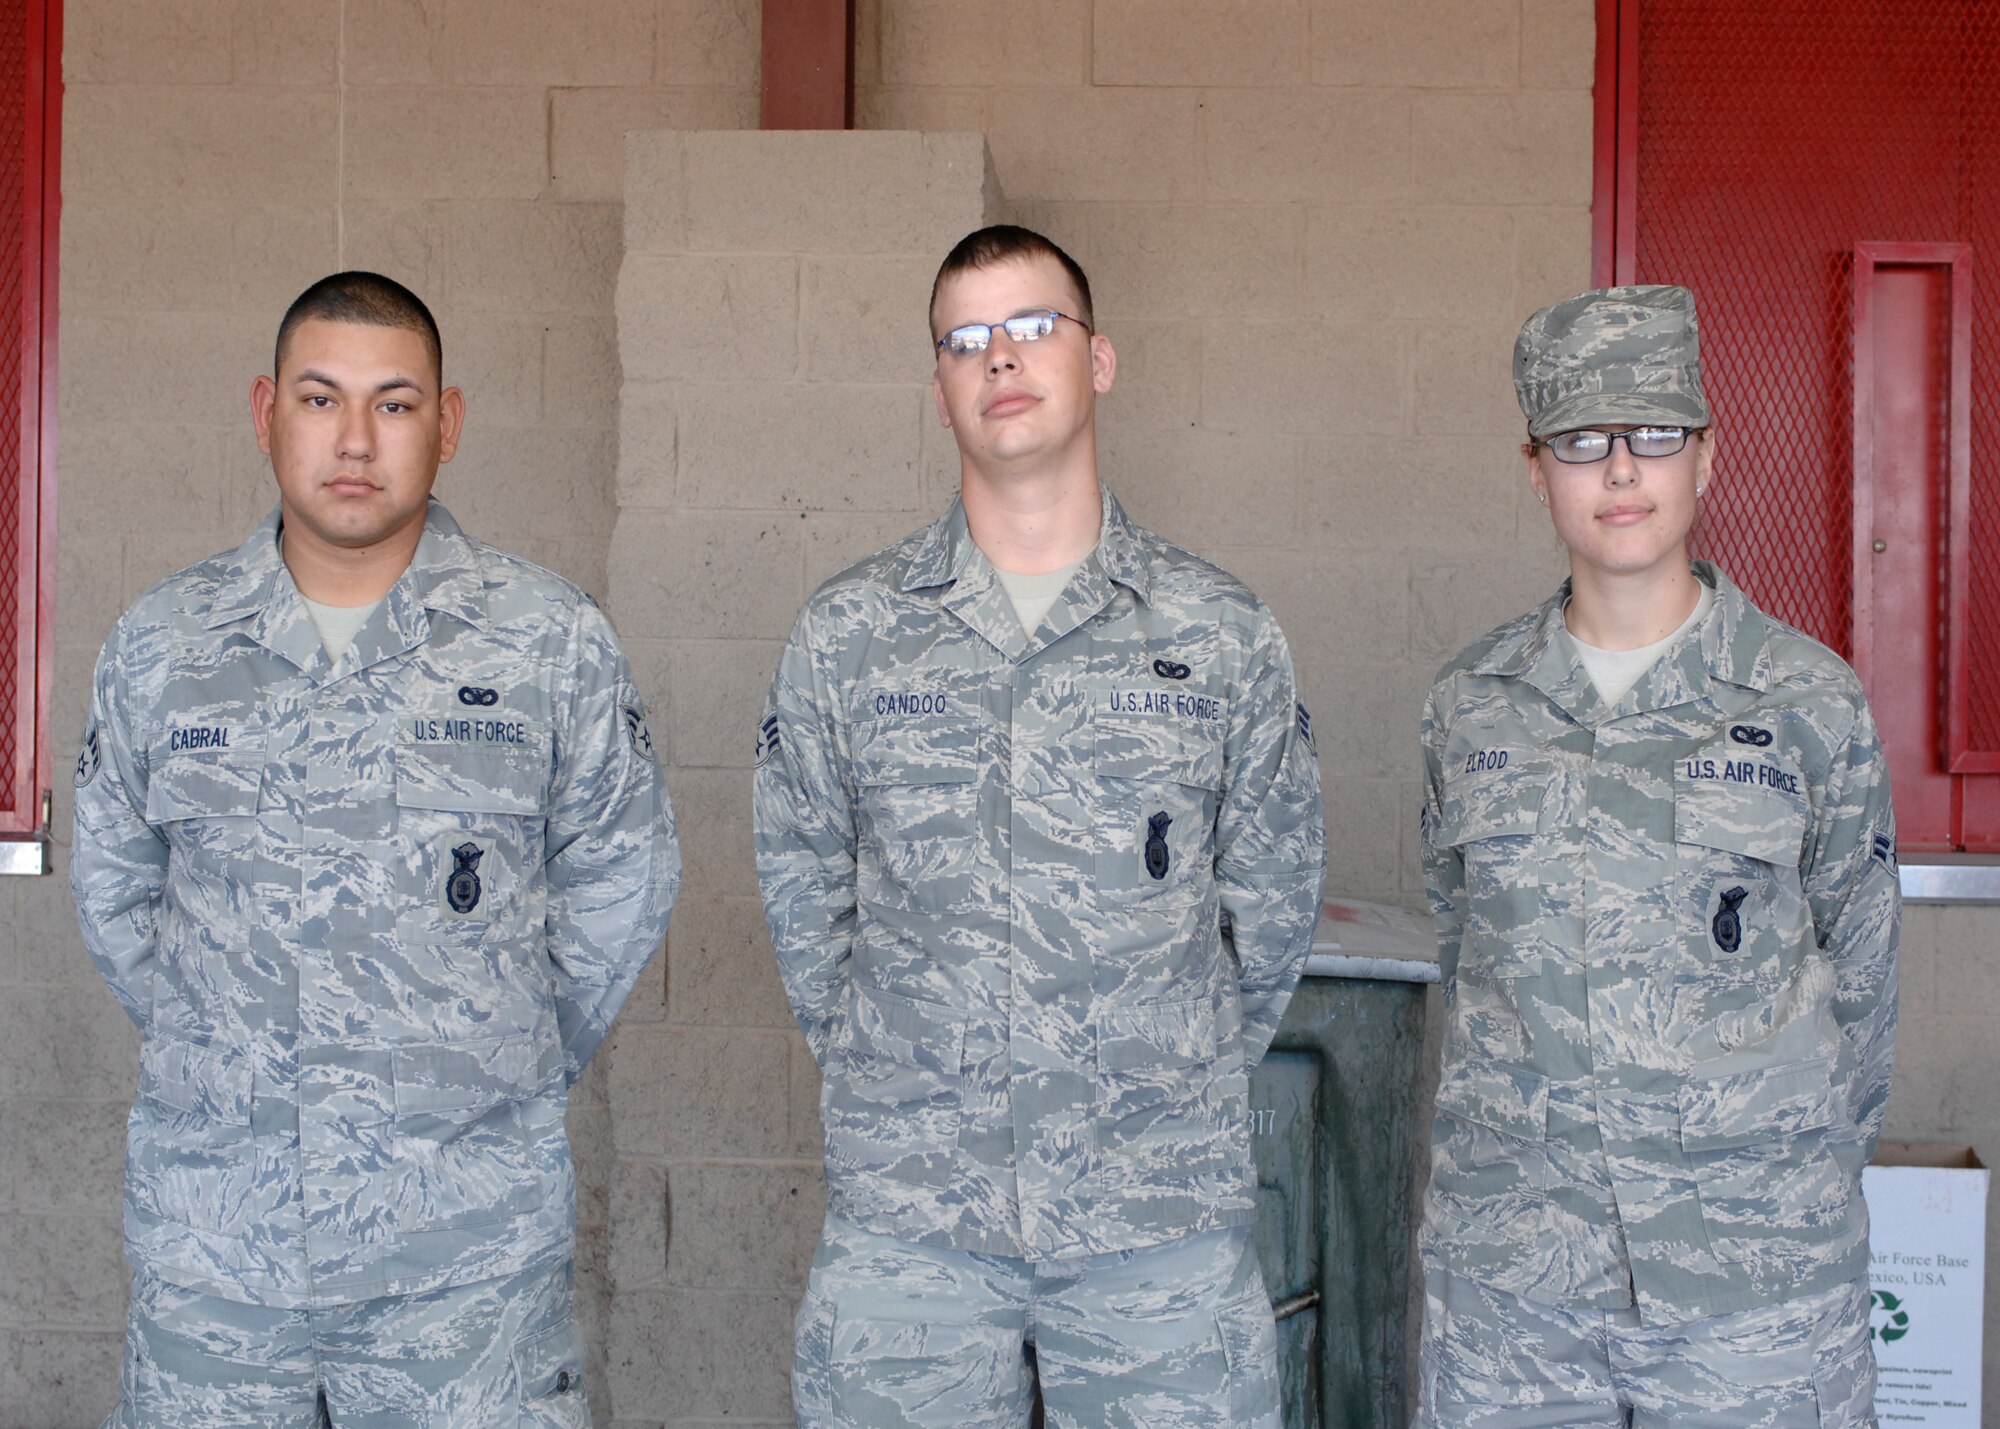 The 49th Security Forces Squadron welcomes back three of its members, Senior Airman Andres Cabral, Senior Airman Ross Candoo and Airman 1st Class Jamie Elrod, Feb. 9, at Holloman Air Force Base, N.M. The Airmen returned from a 179-day deployment to Iraq. (U.S. Air Force photo/Airman 1st Class Rachel A. Kocin)